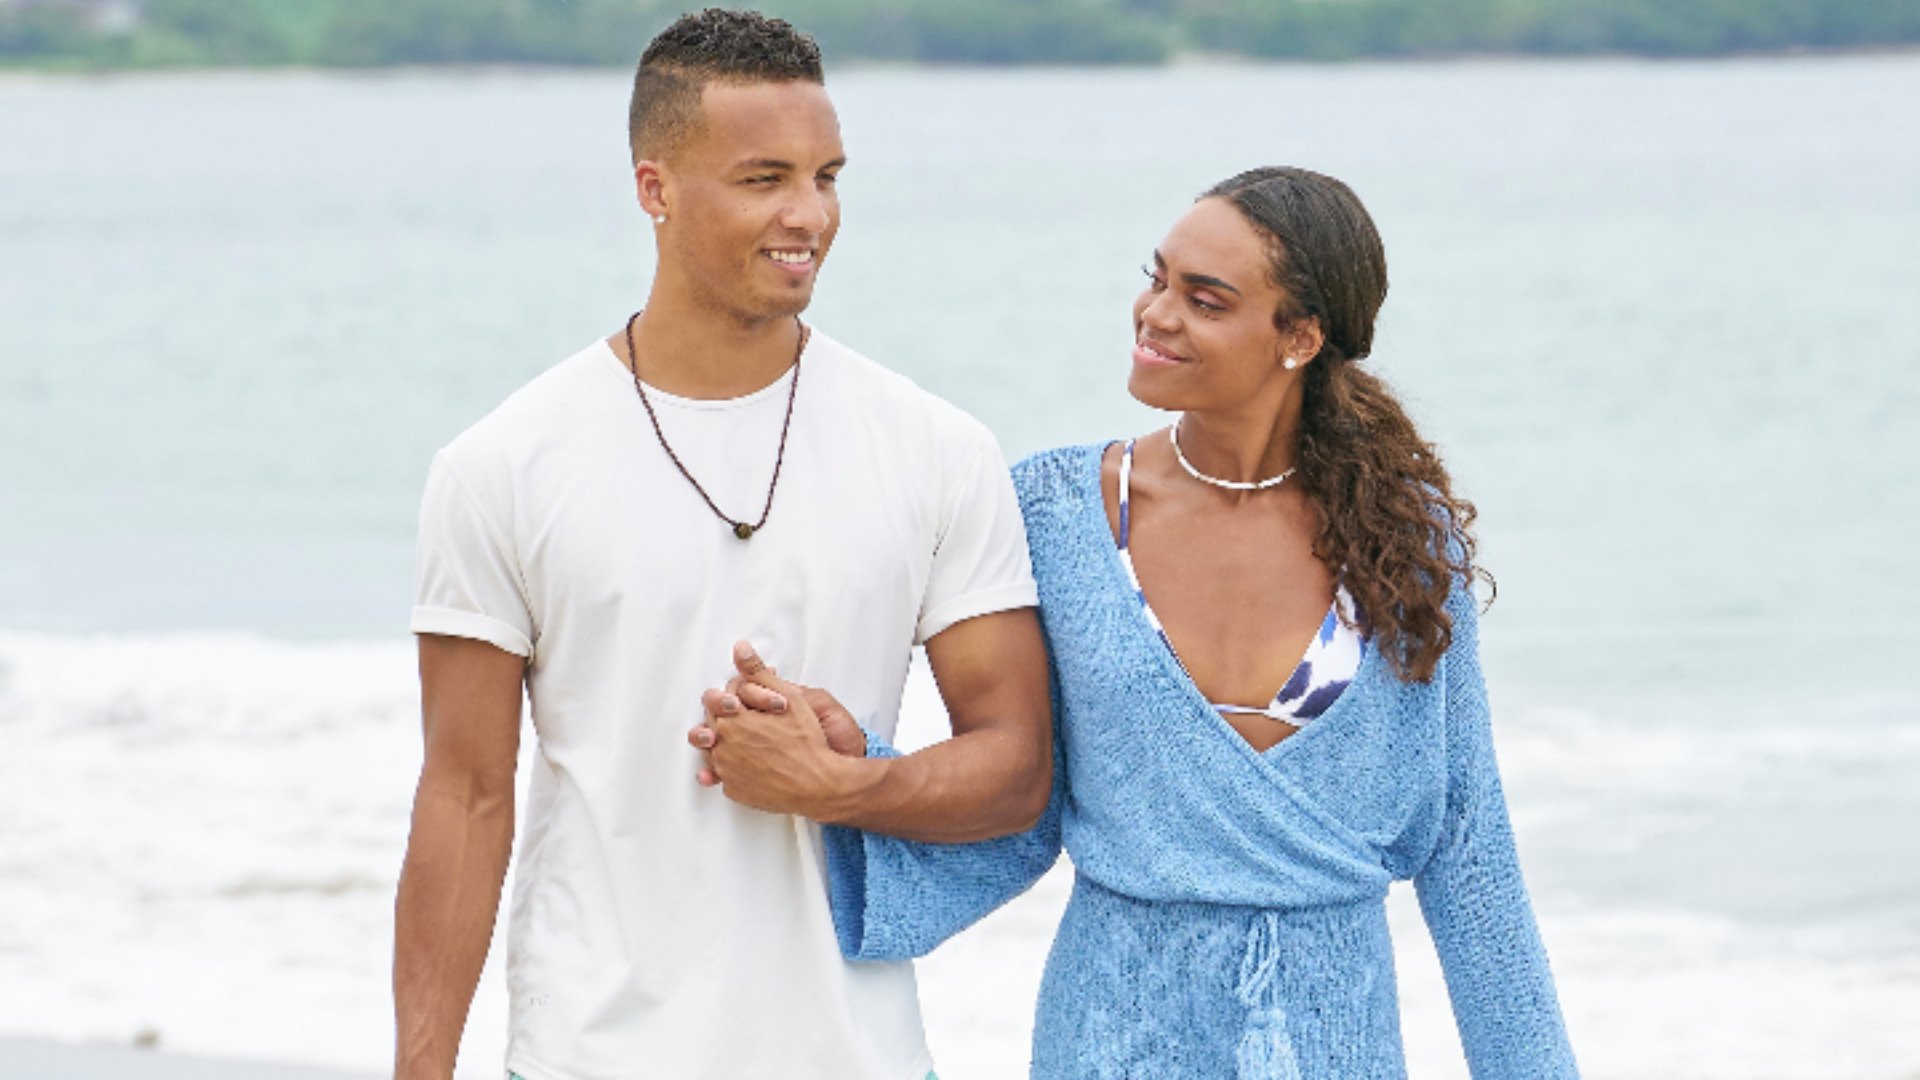 Brandon Jones and Michelle Young on their last date together on the beach in ‘The Bachelorette’ Season 18 finale